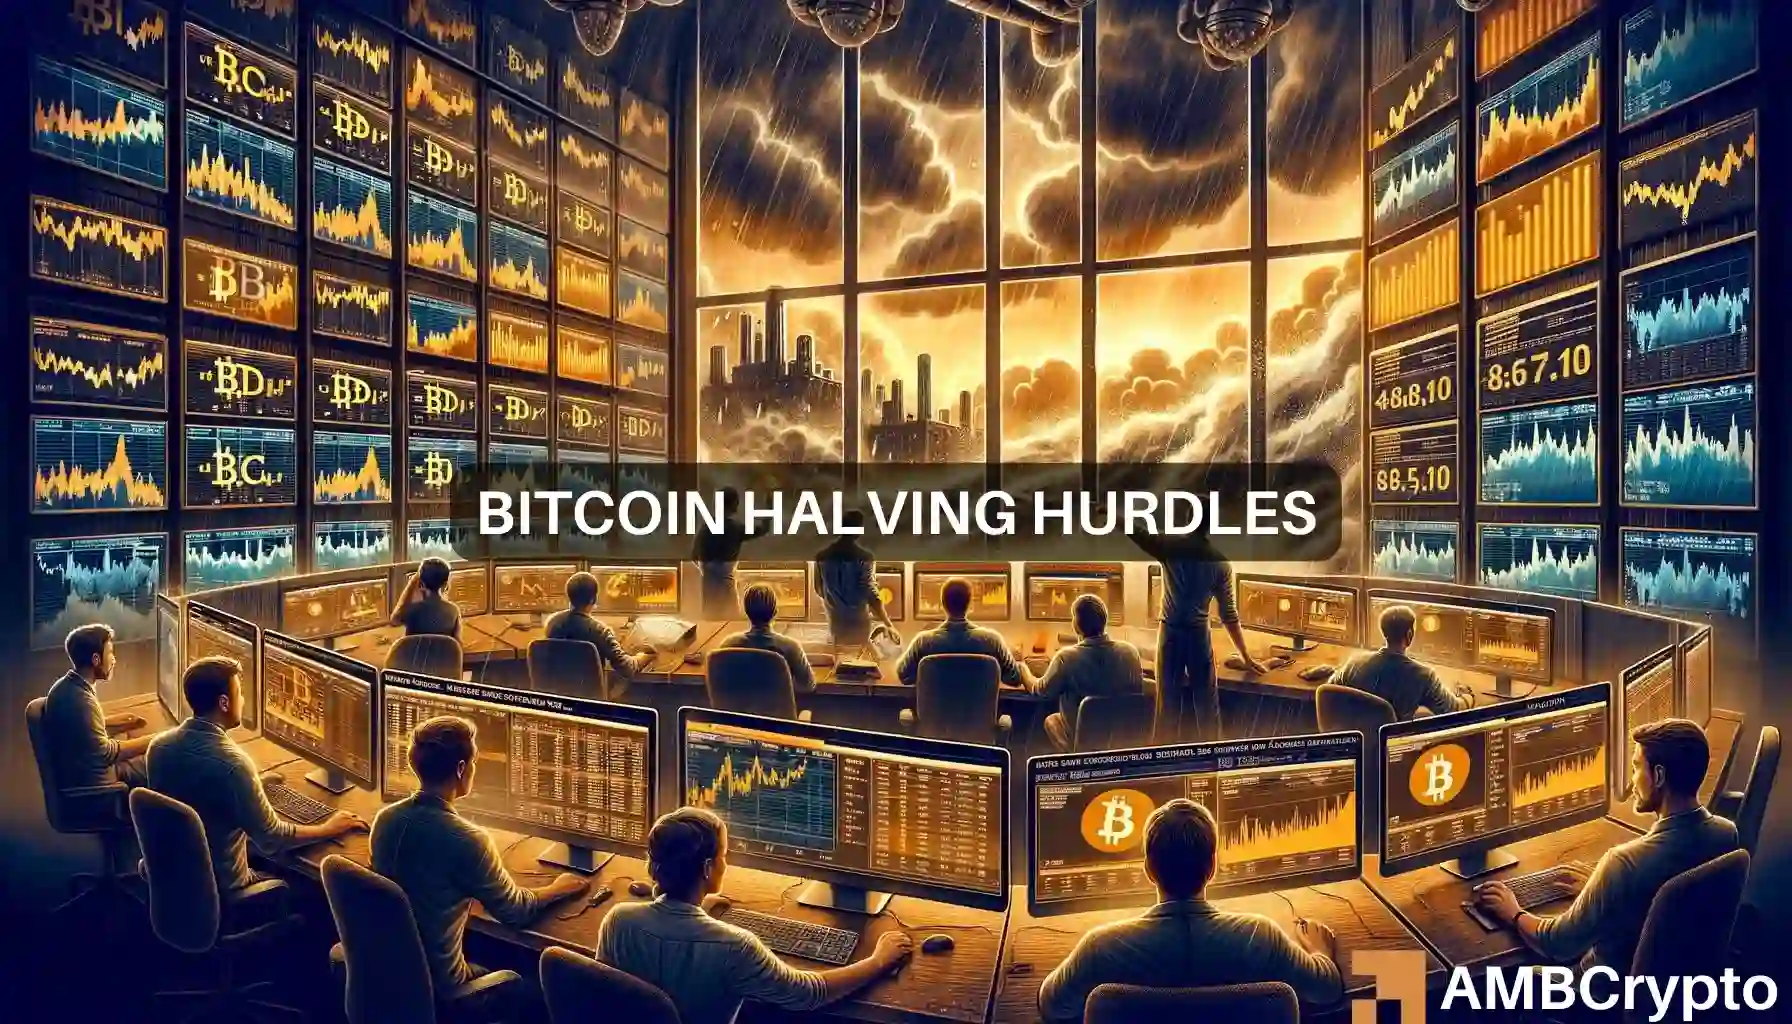 From holding to selling: Bitcoin miners adjust tactics post-halving